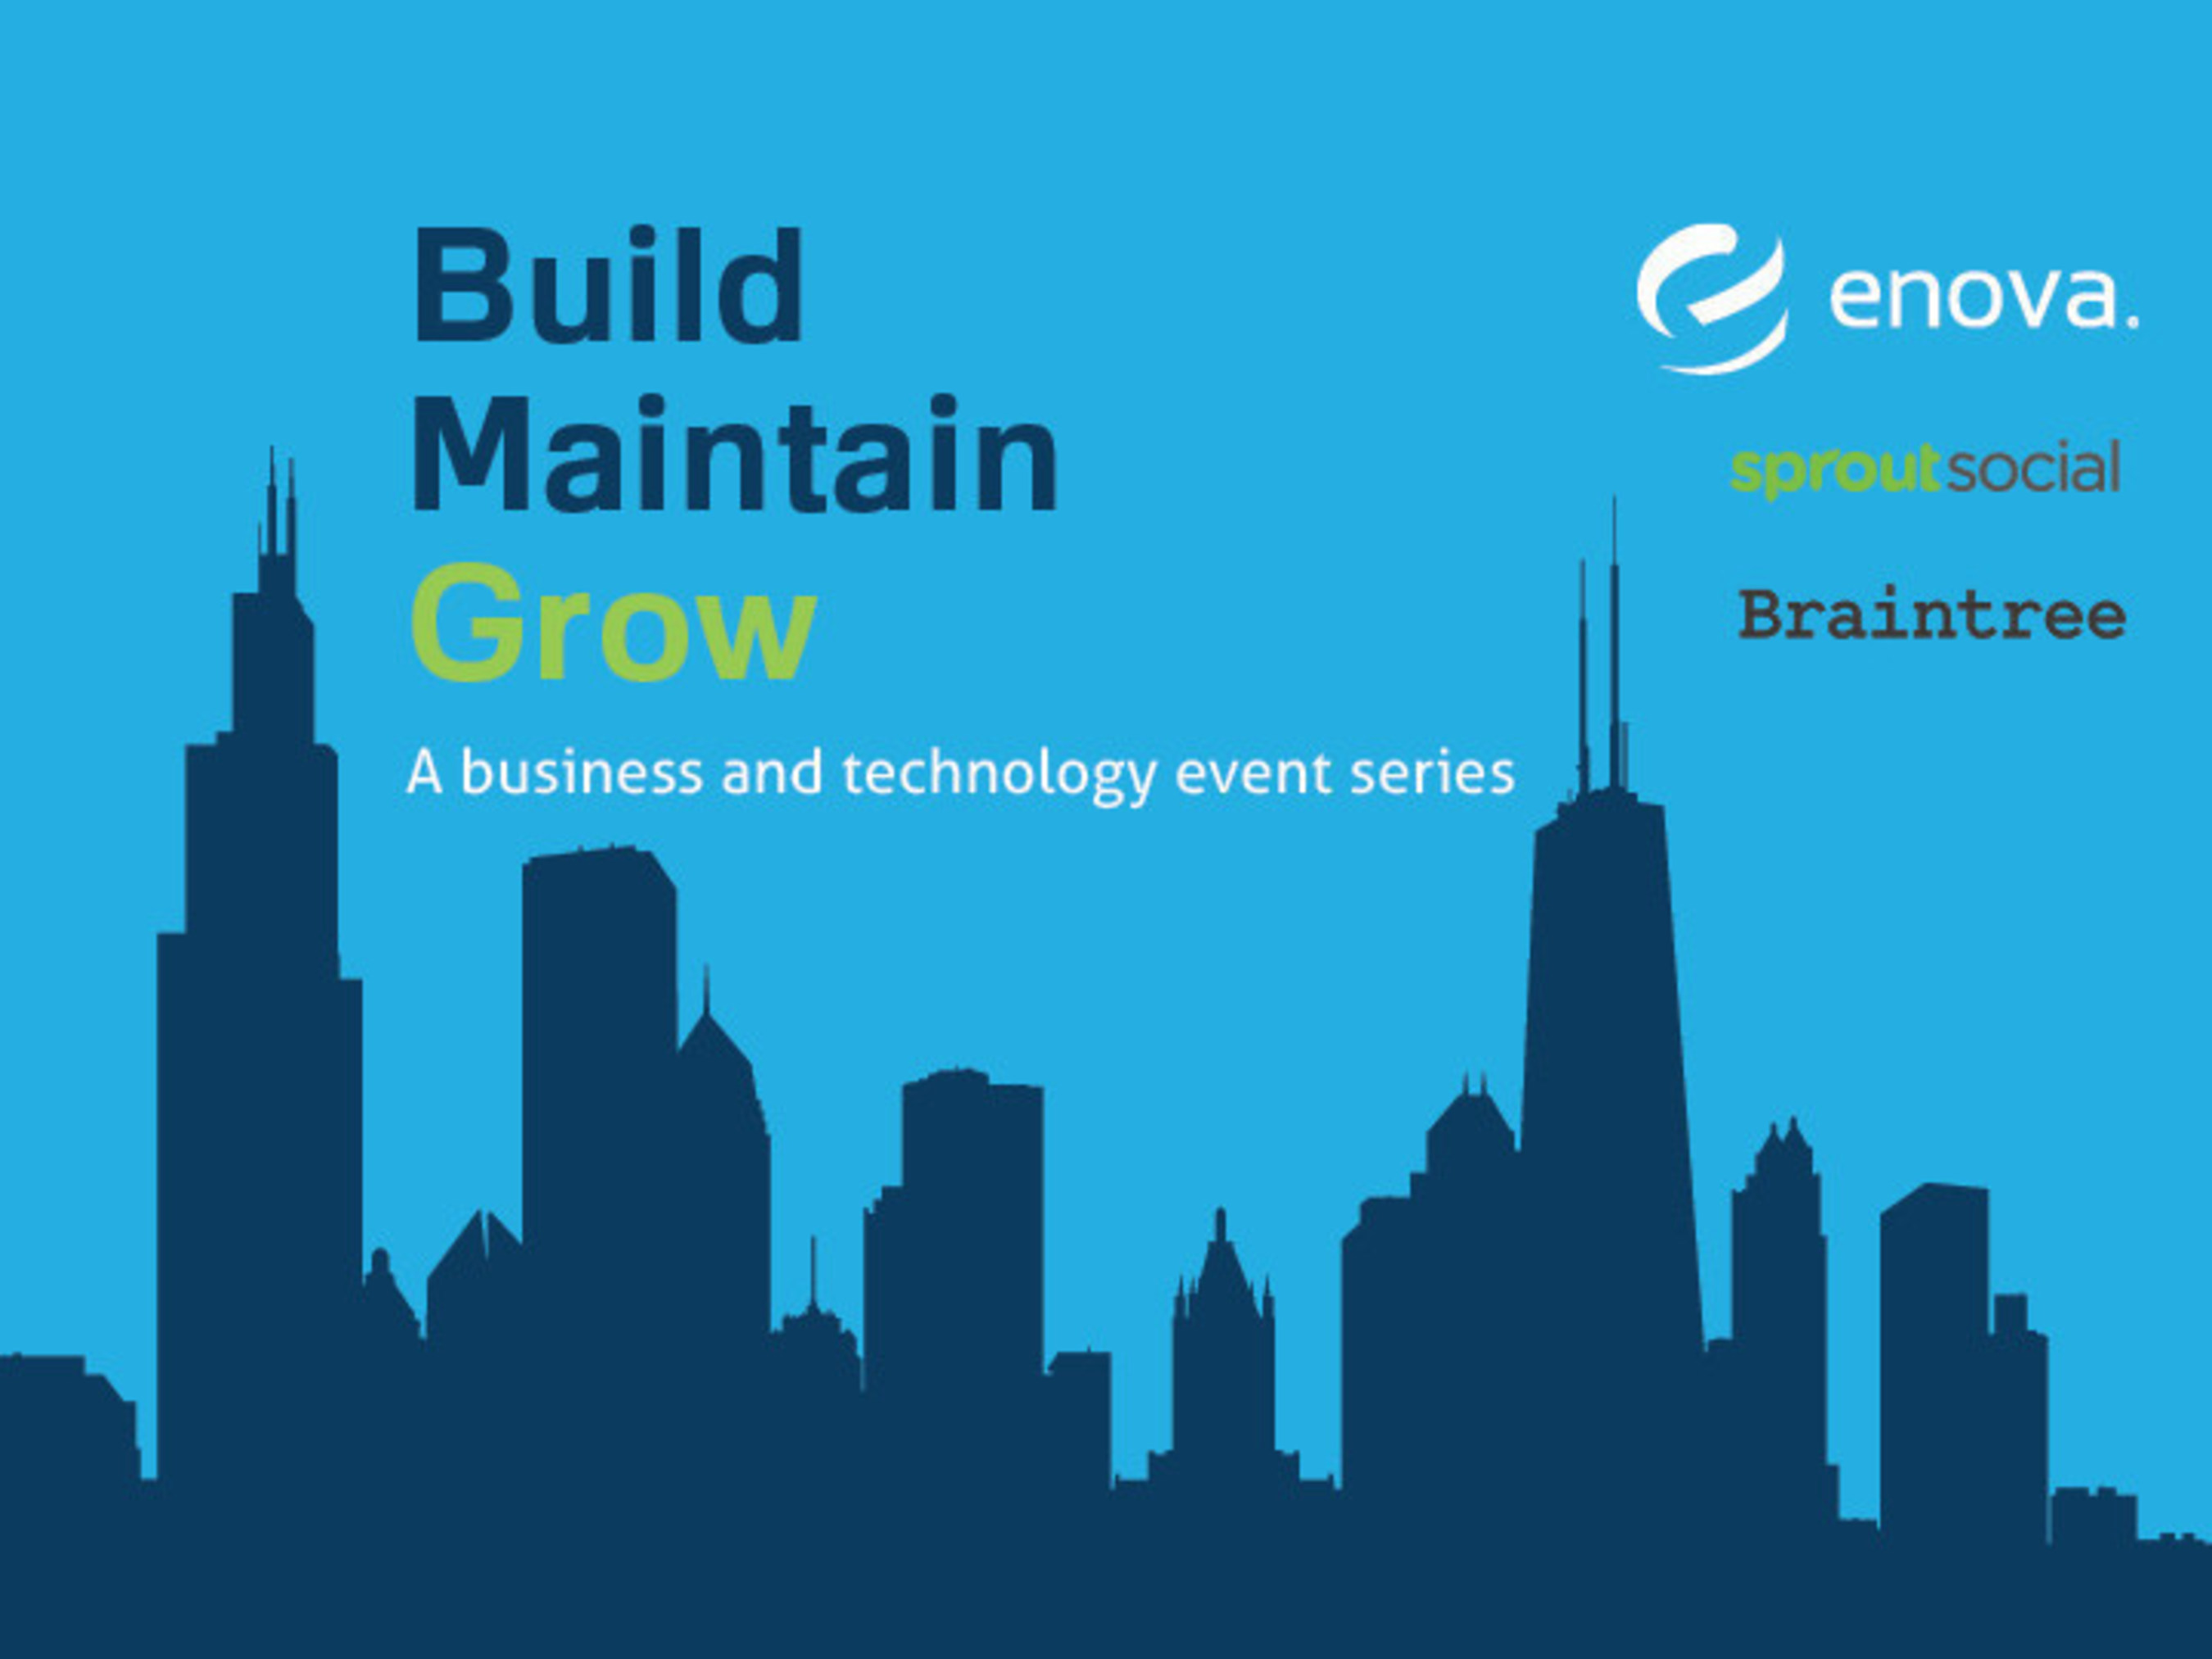 Enova International, Braintree and Sprout Social are launching Chicago's newest business and technology event series.